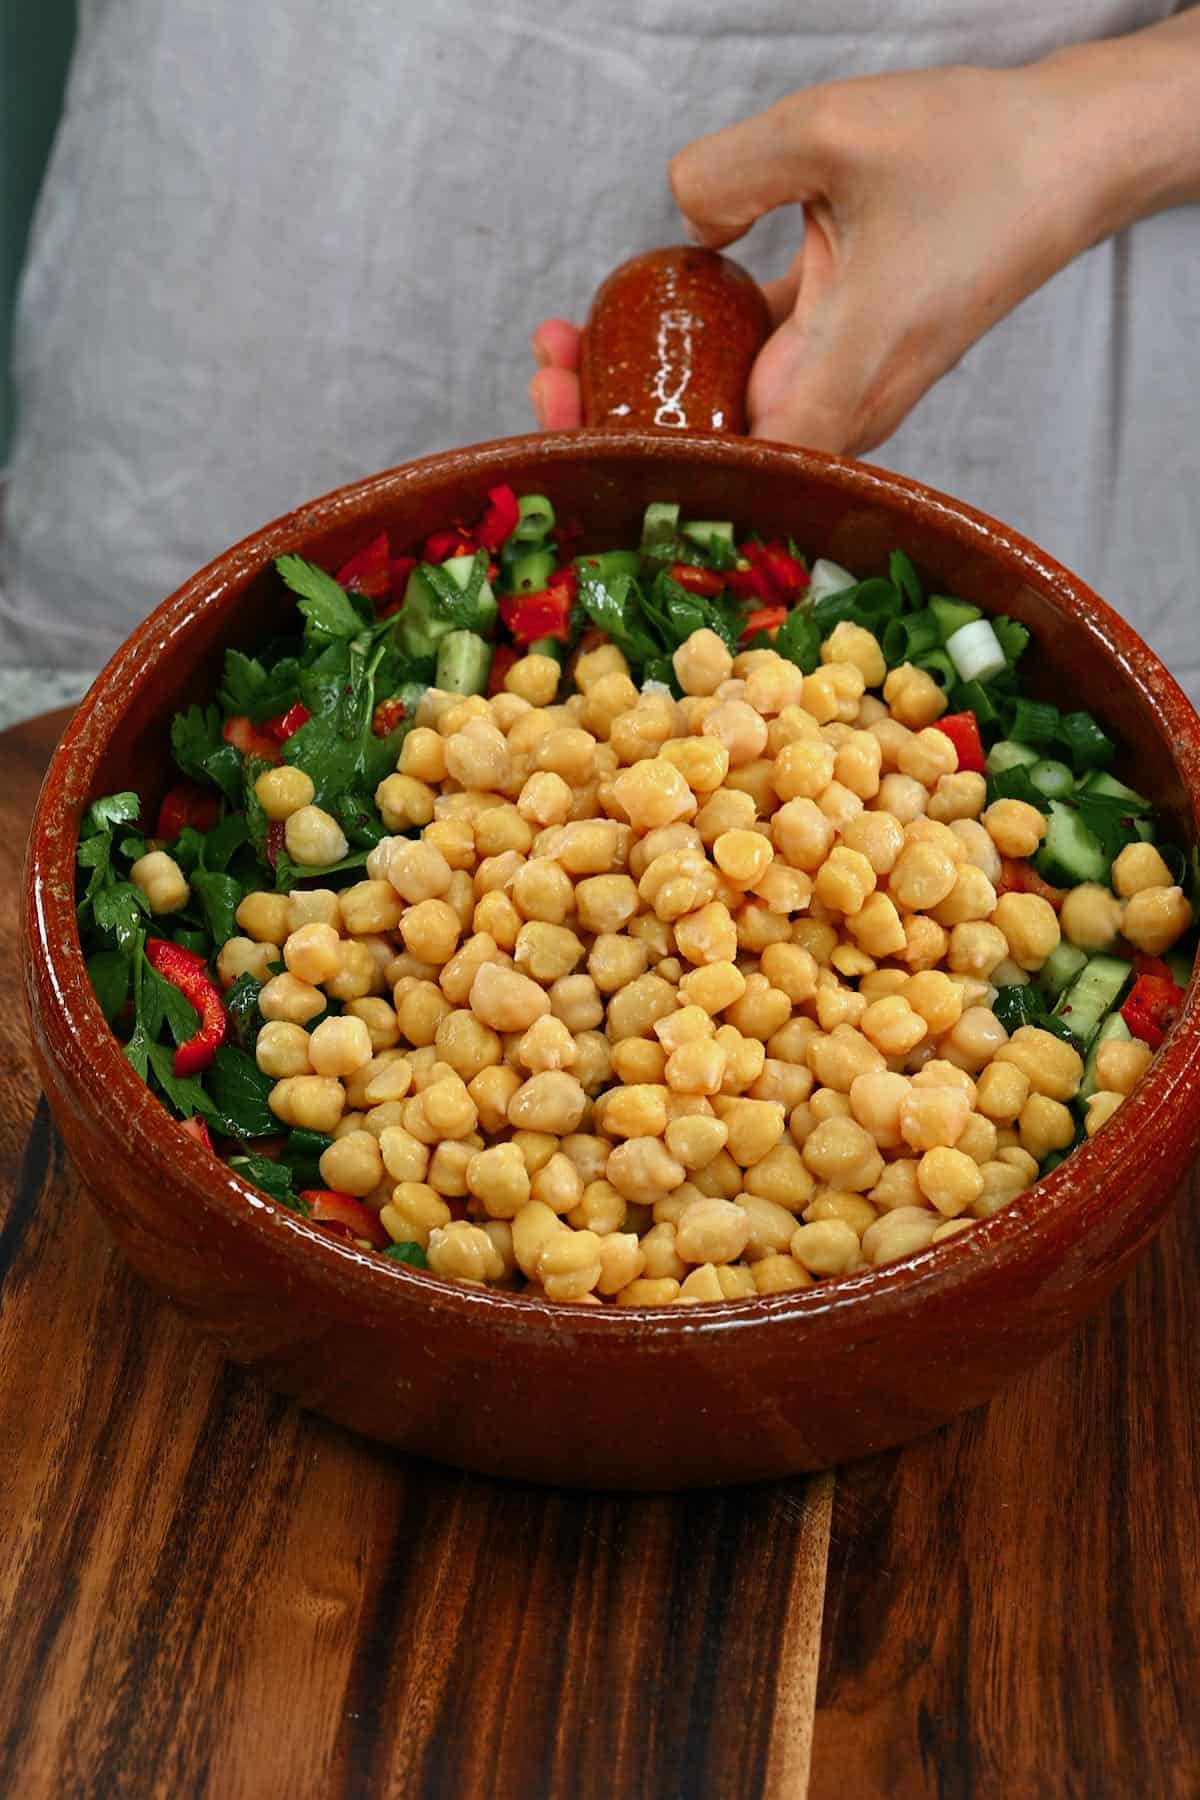 Chickpeas added to salad